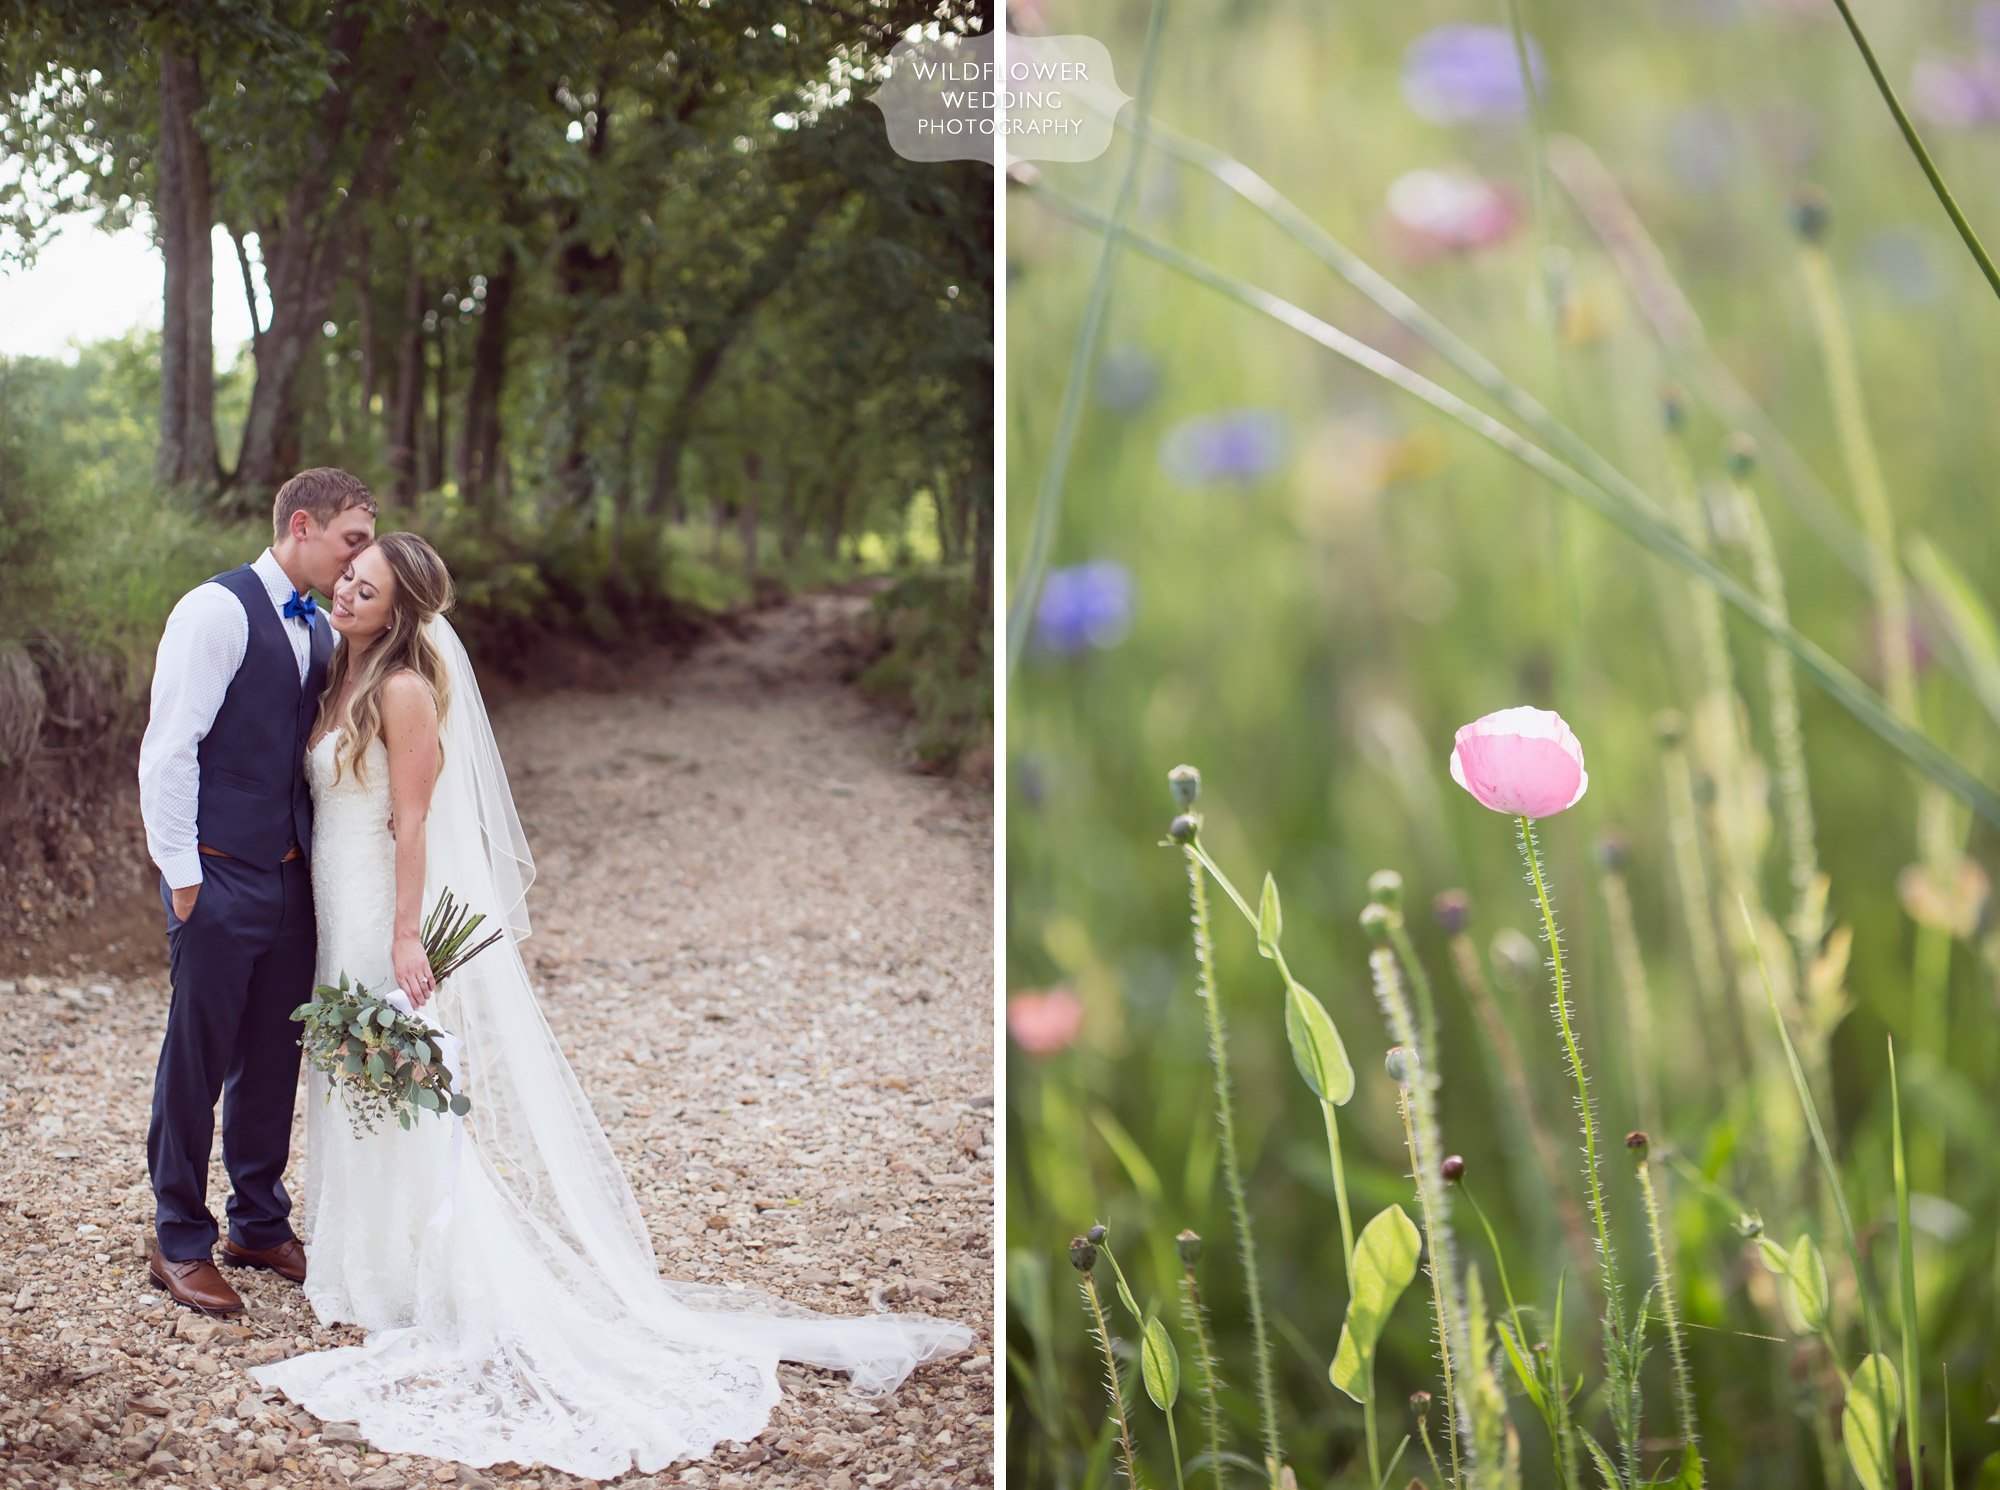 Bride and groom pose in the creek bed outside of the Kempker's Back 40 wedding venue with fields of wildflowers.